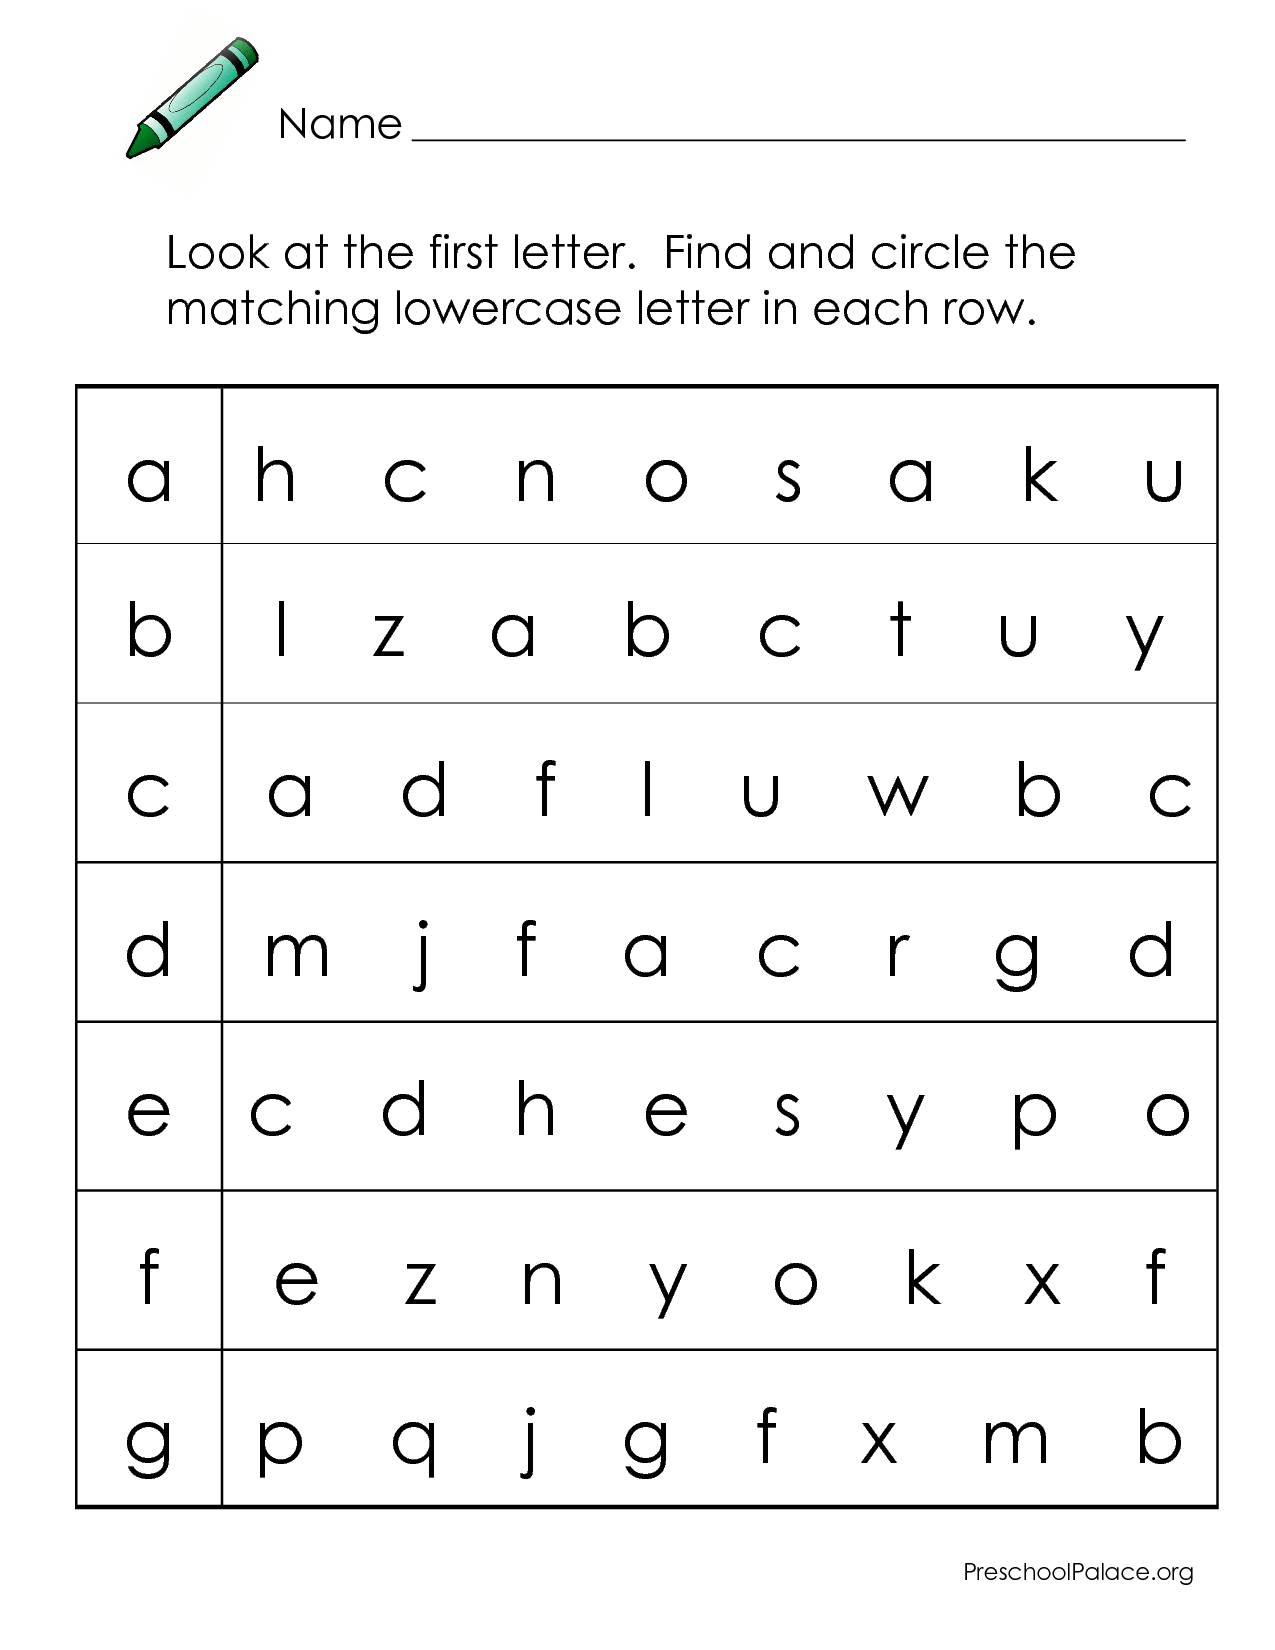 Abcs - Letter Matching A-G Lowercase | Letter Recognition pertaining to Alphabet Worksheets Preschool